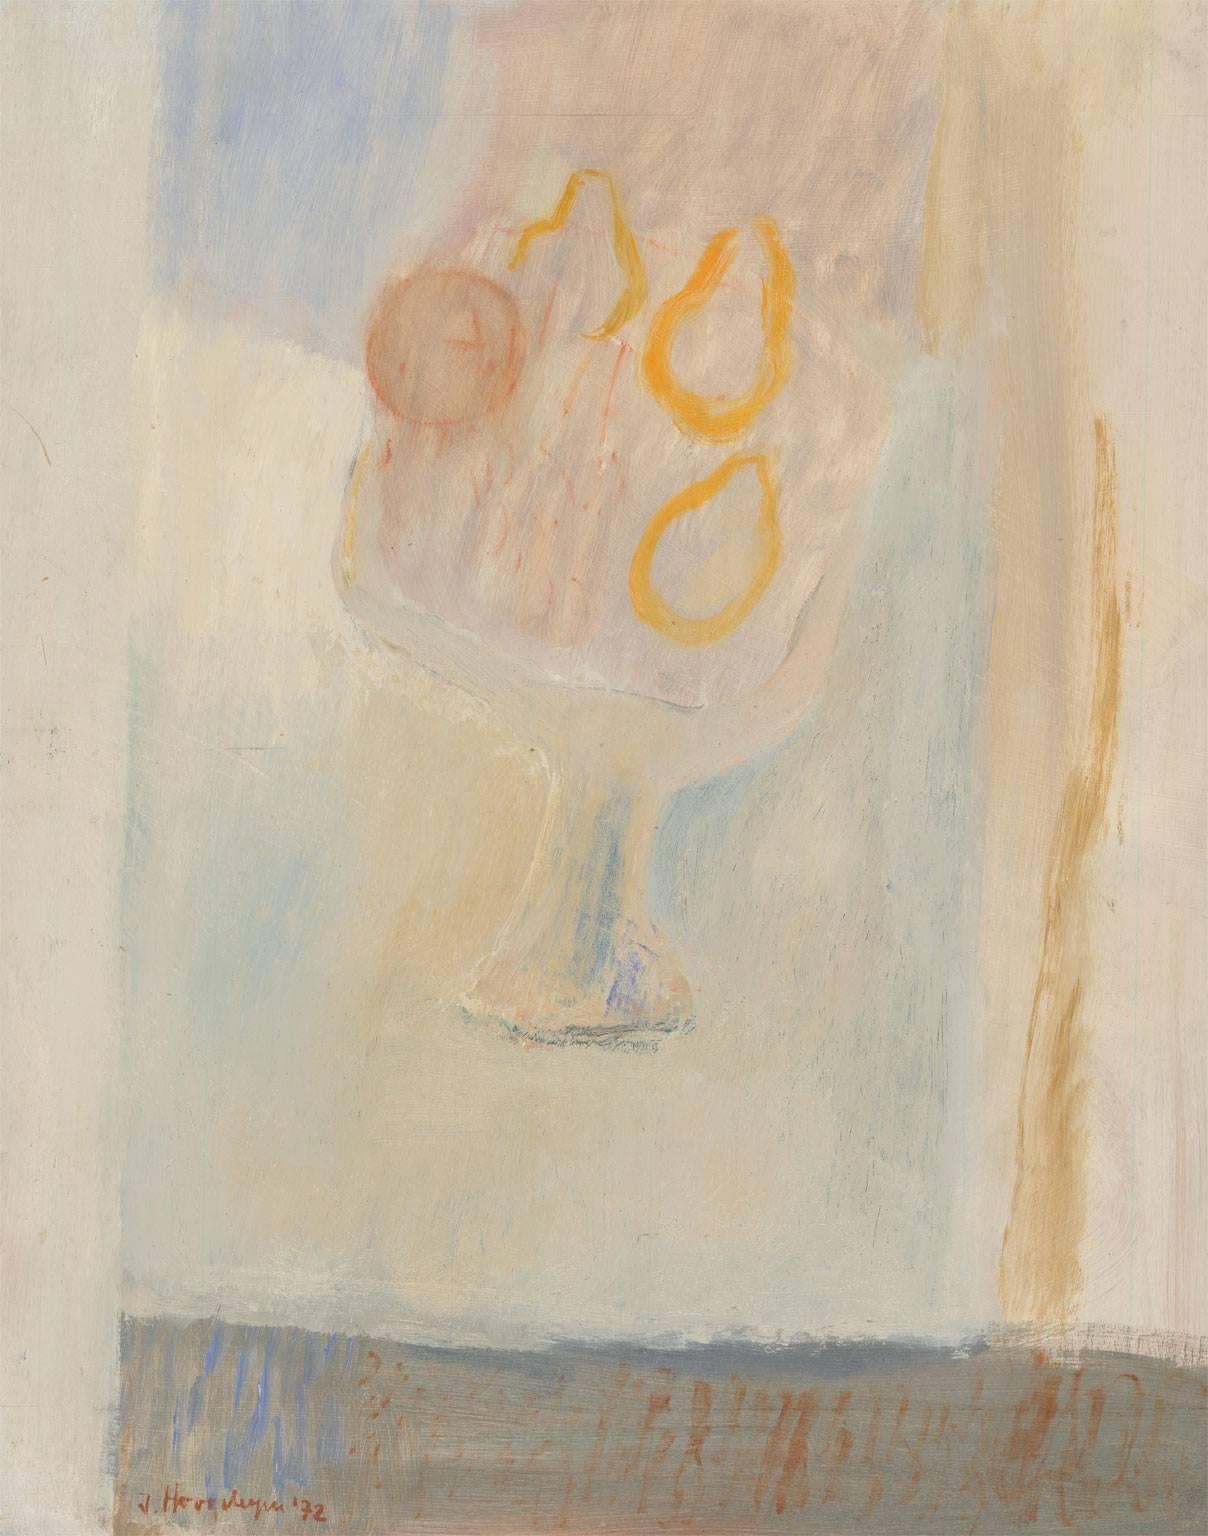 A minimalist modern still life of pears by the well listed Belgian artist Jan Hoogsteyns, signed and dated to the lower left. Painted on thick panel. Signed and dated 1972 to the lower left. On panel.

Image Size: 48.7 x 38.3cm (19.2" x 15.1")
Total